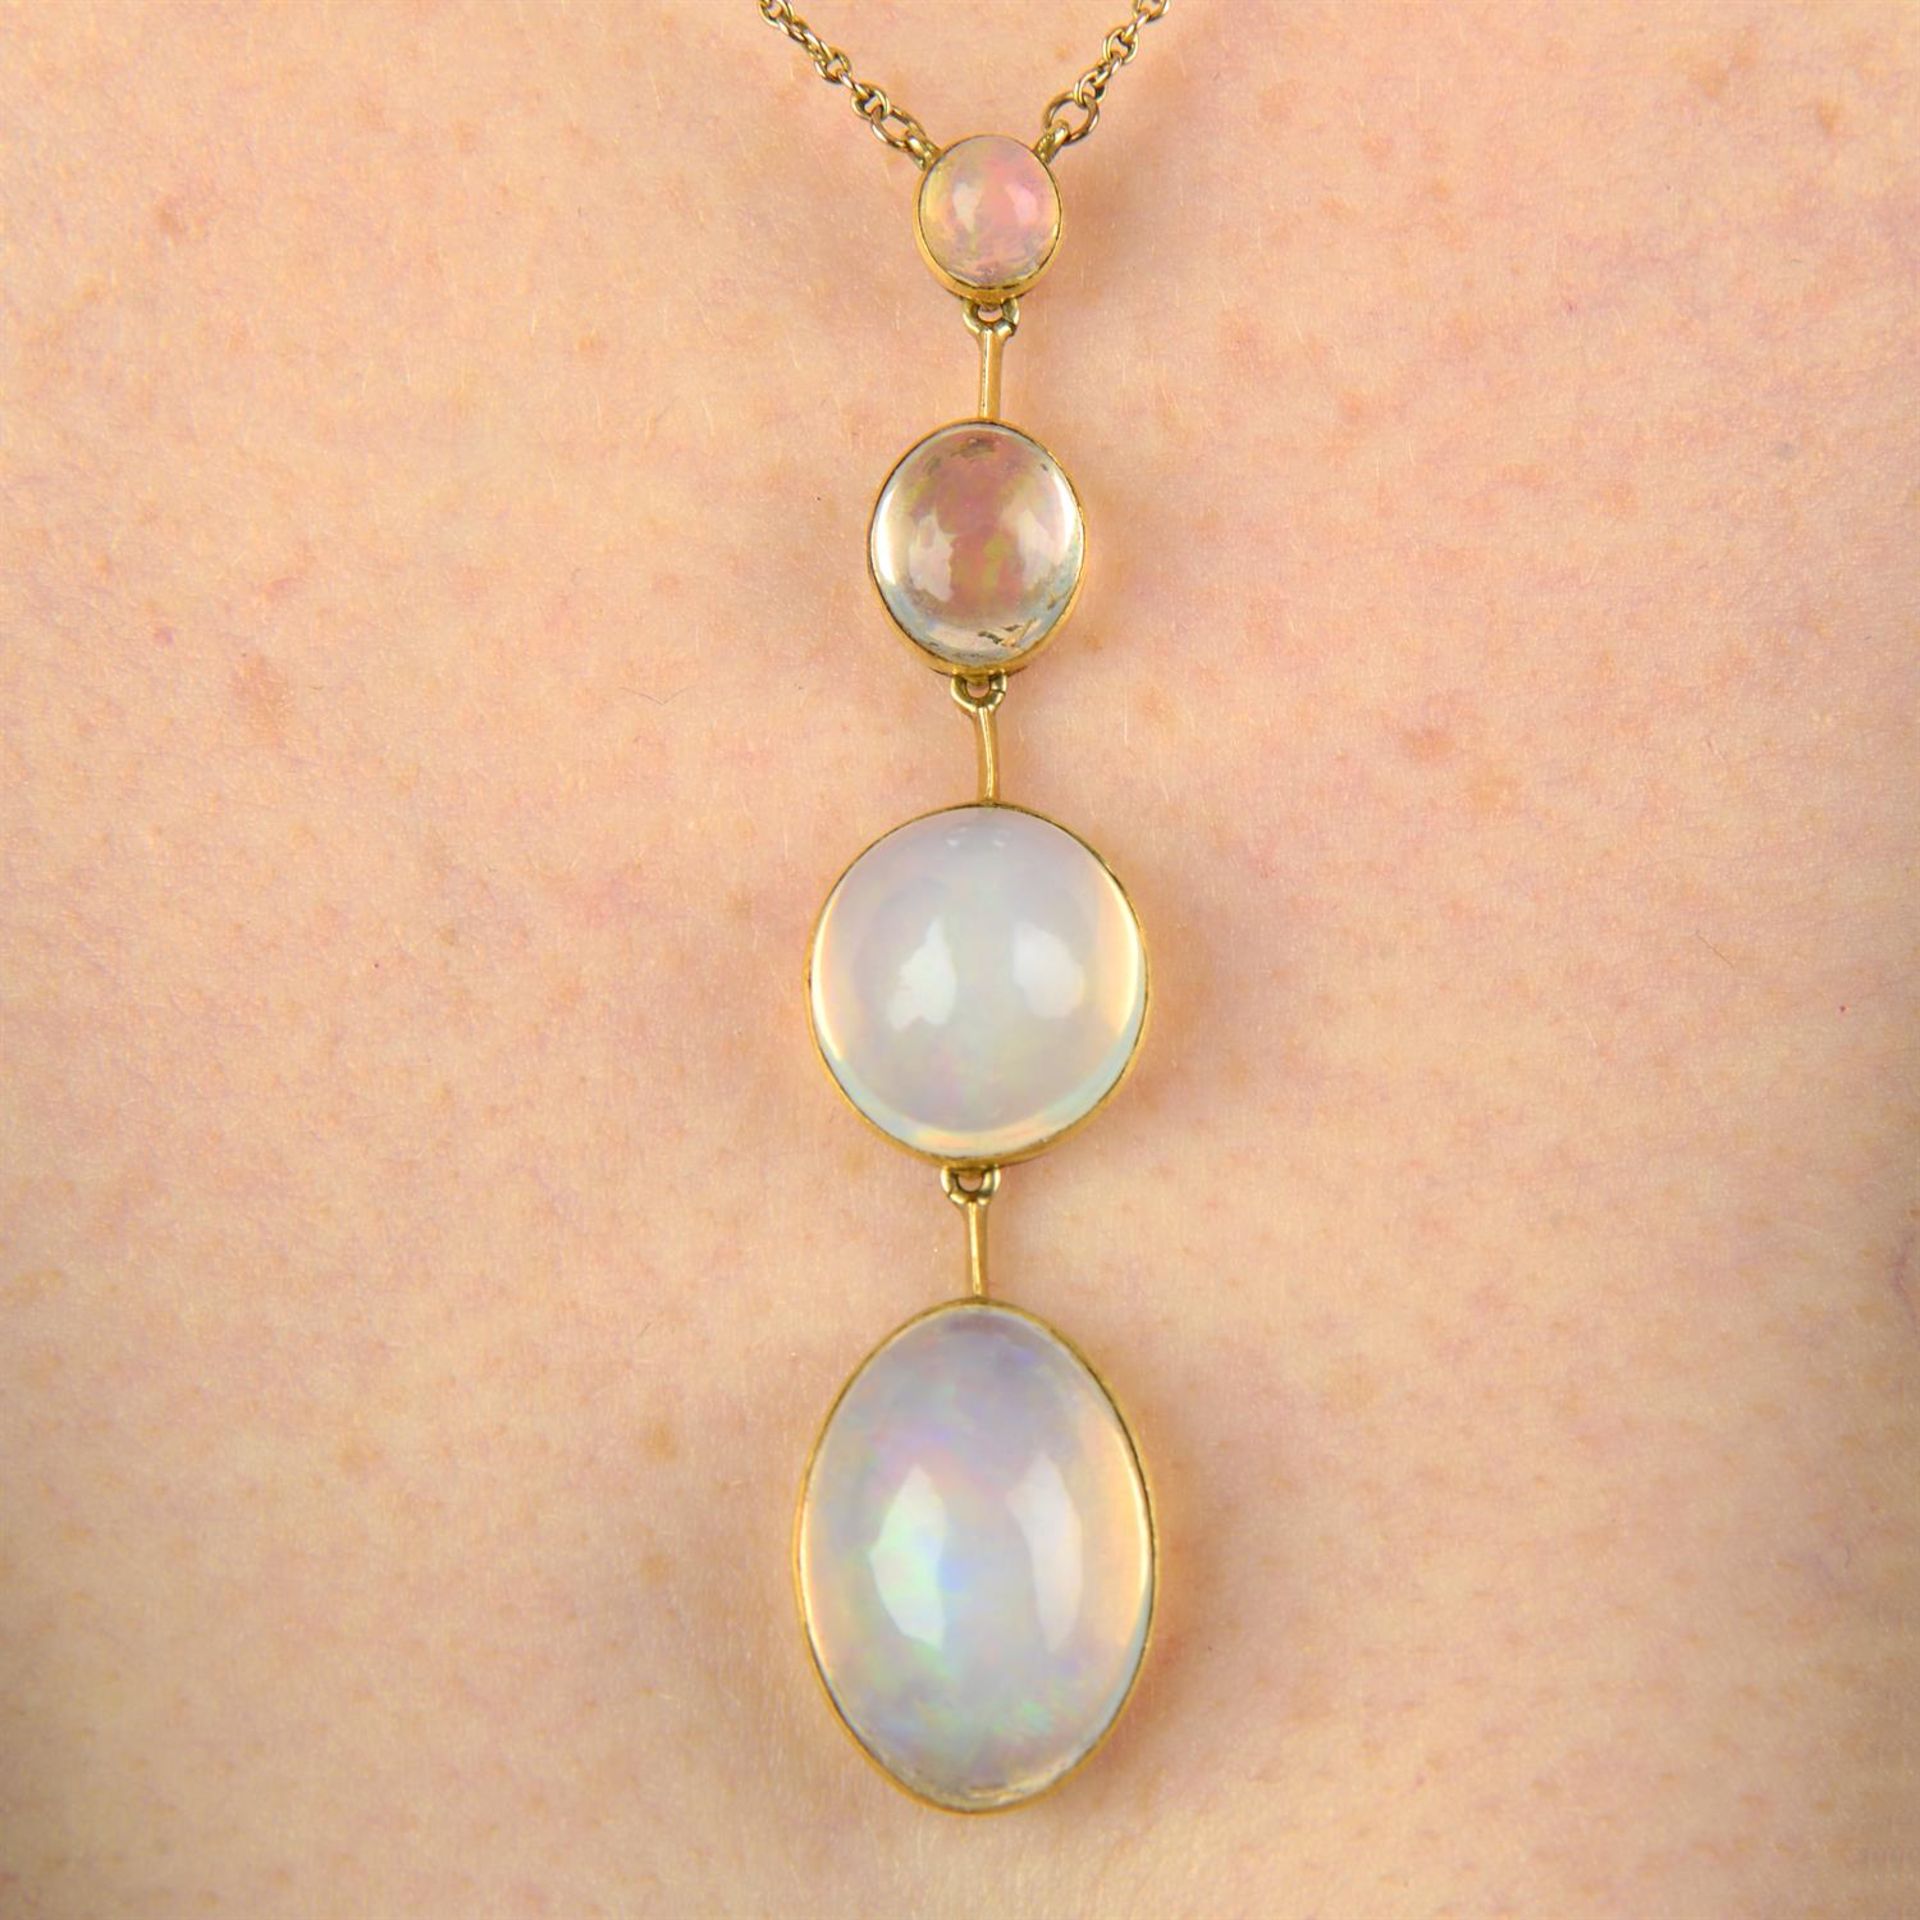 An Edwardian 15ct gold opal drop pendant, with integral chain and later clasp.